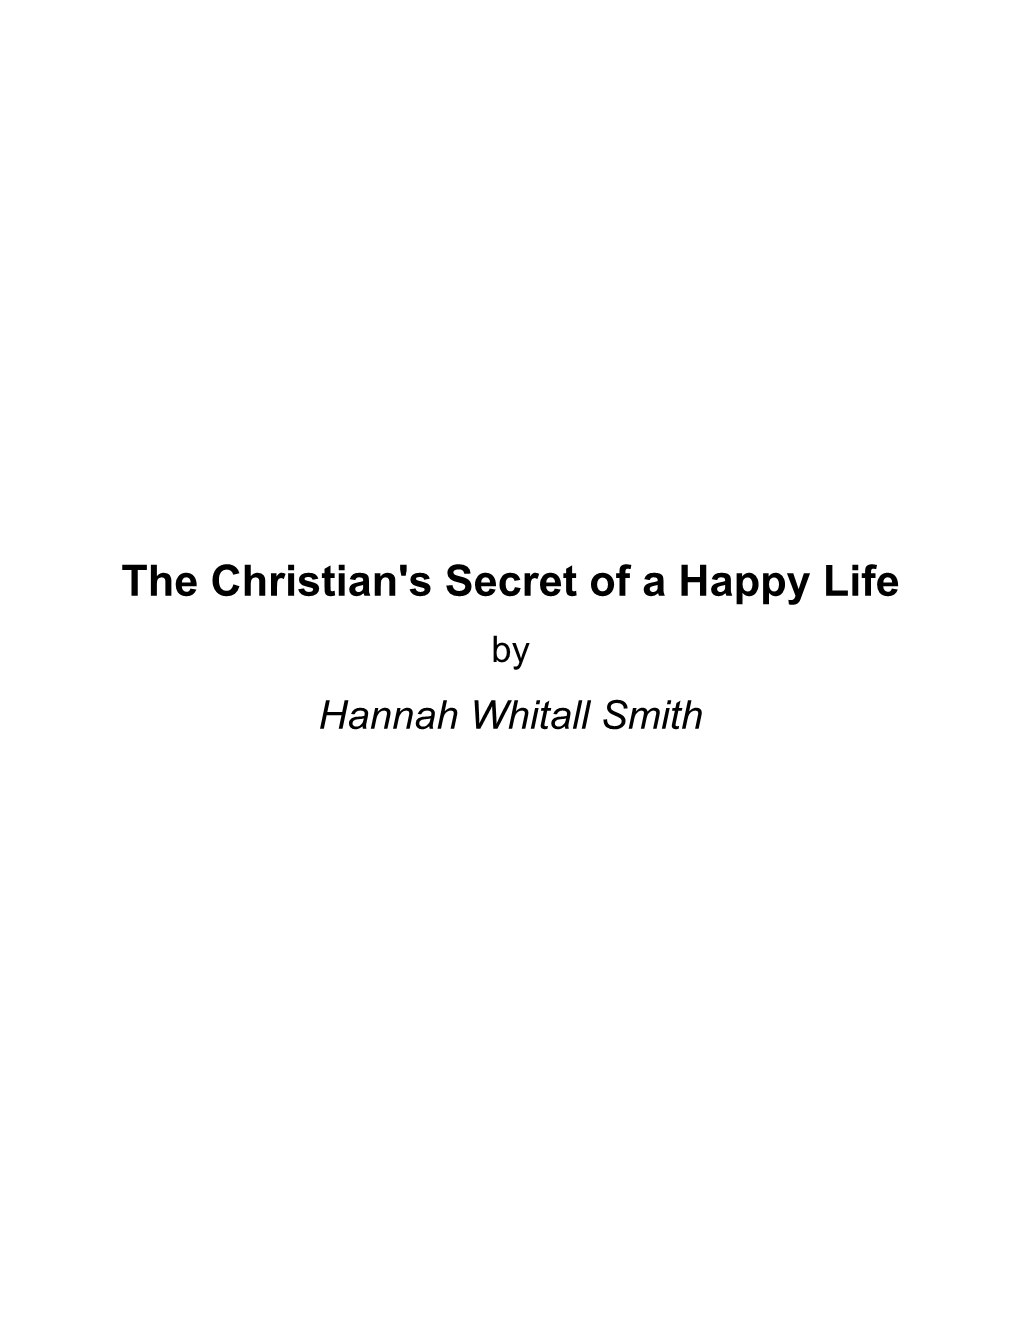 About the Christian's Secret of a Happy Life by Hannah Whitall Smith